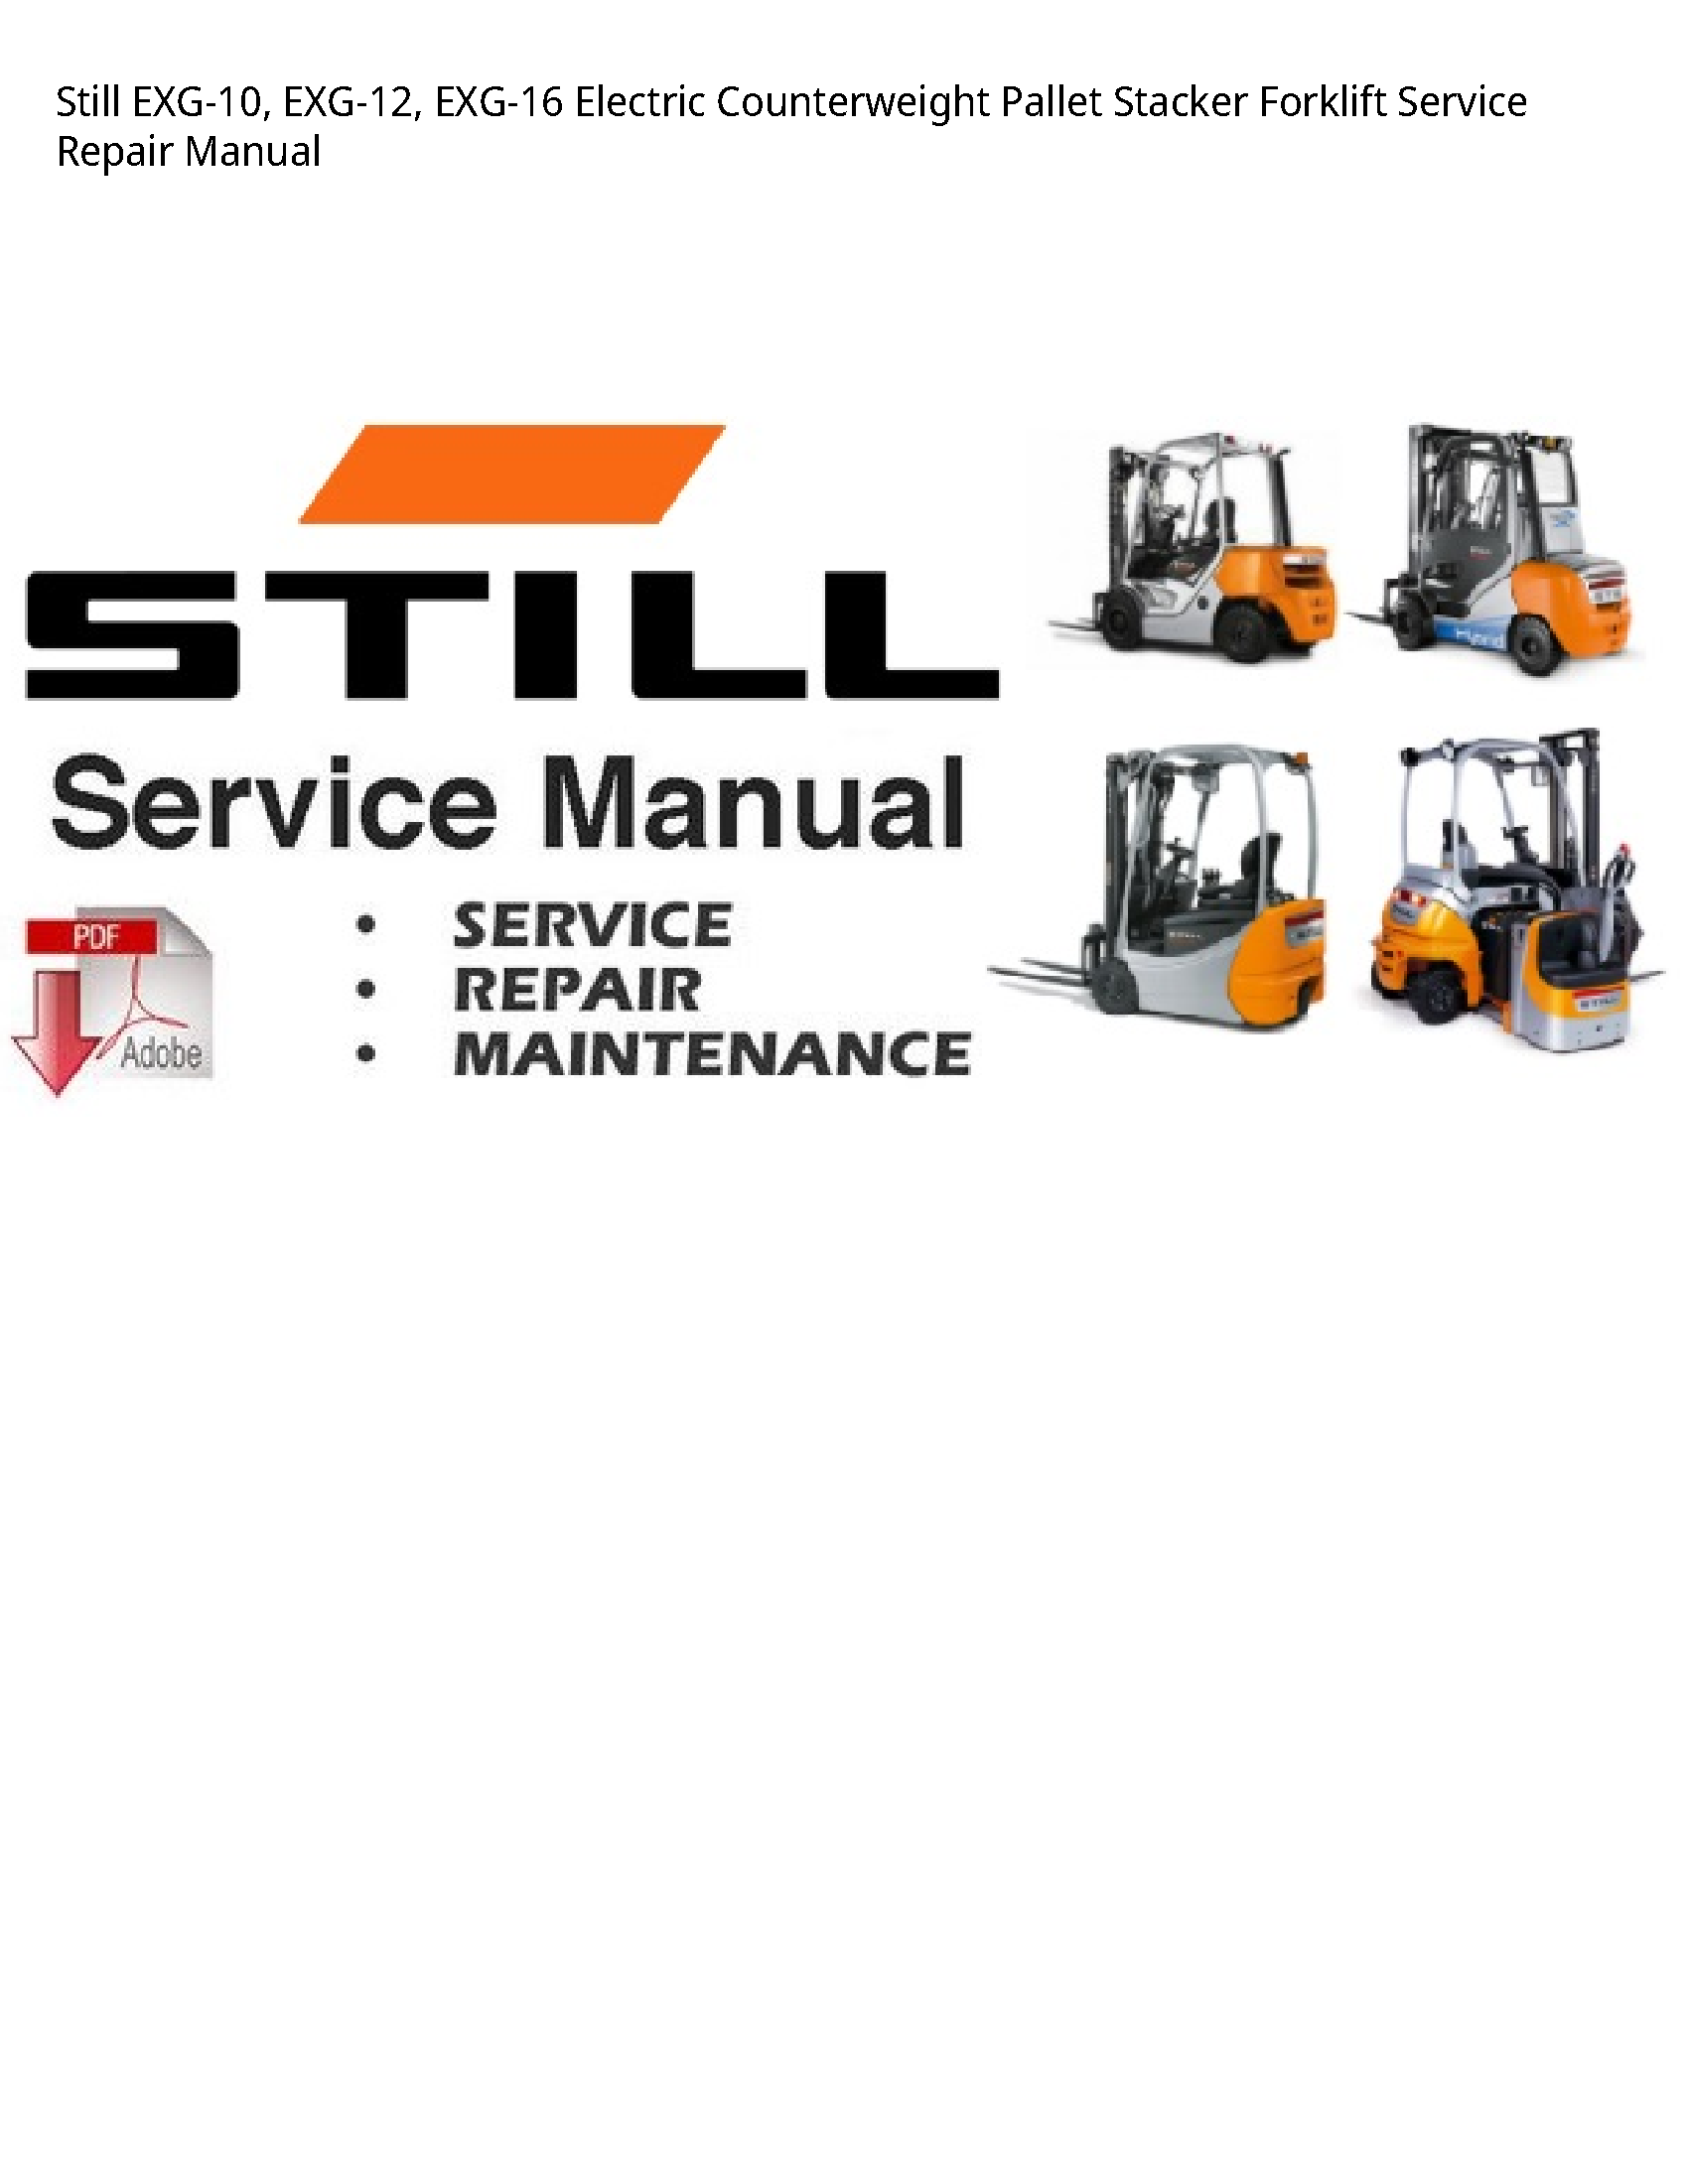 Still EXG-10 Electric Counterweight Pallet Stacker Forklift manual